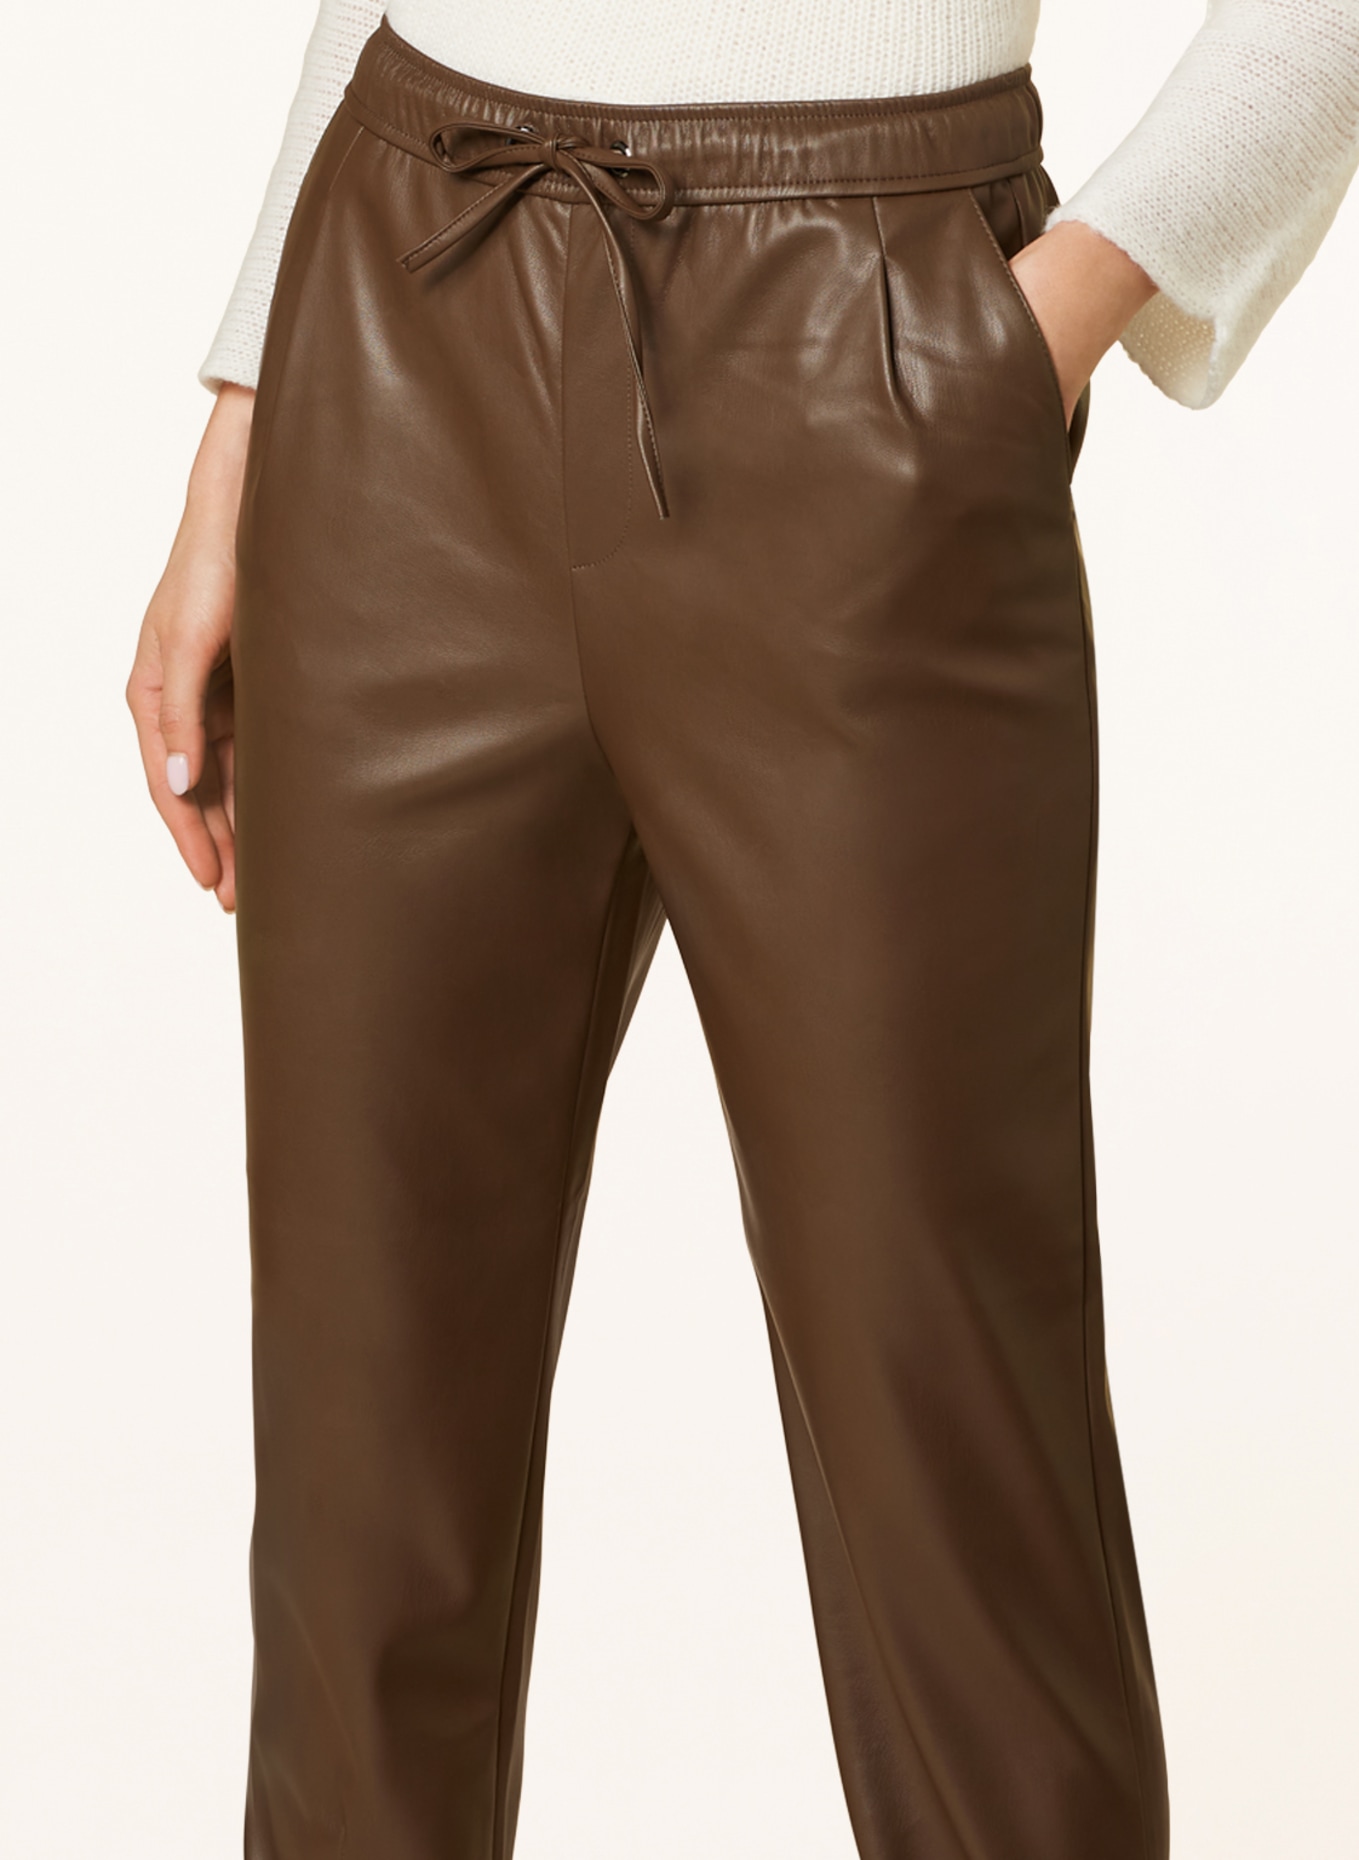 OPUS 7/8 trousers in jogger style in leather look, Color: DARK BROWN (Image 5)